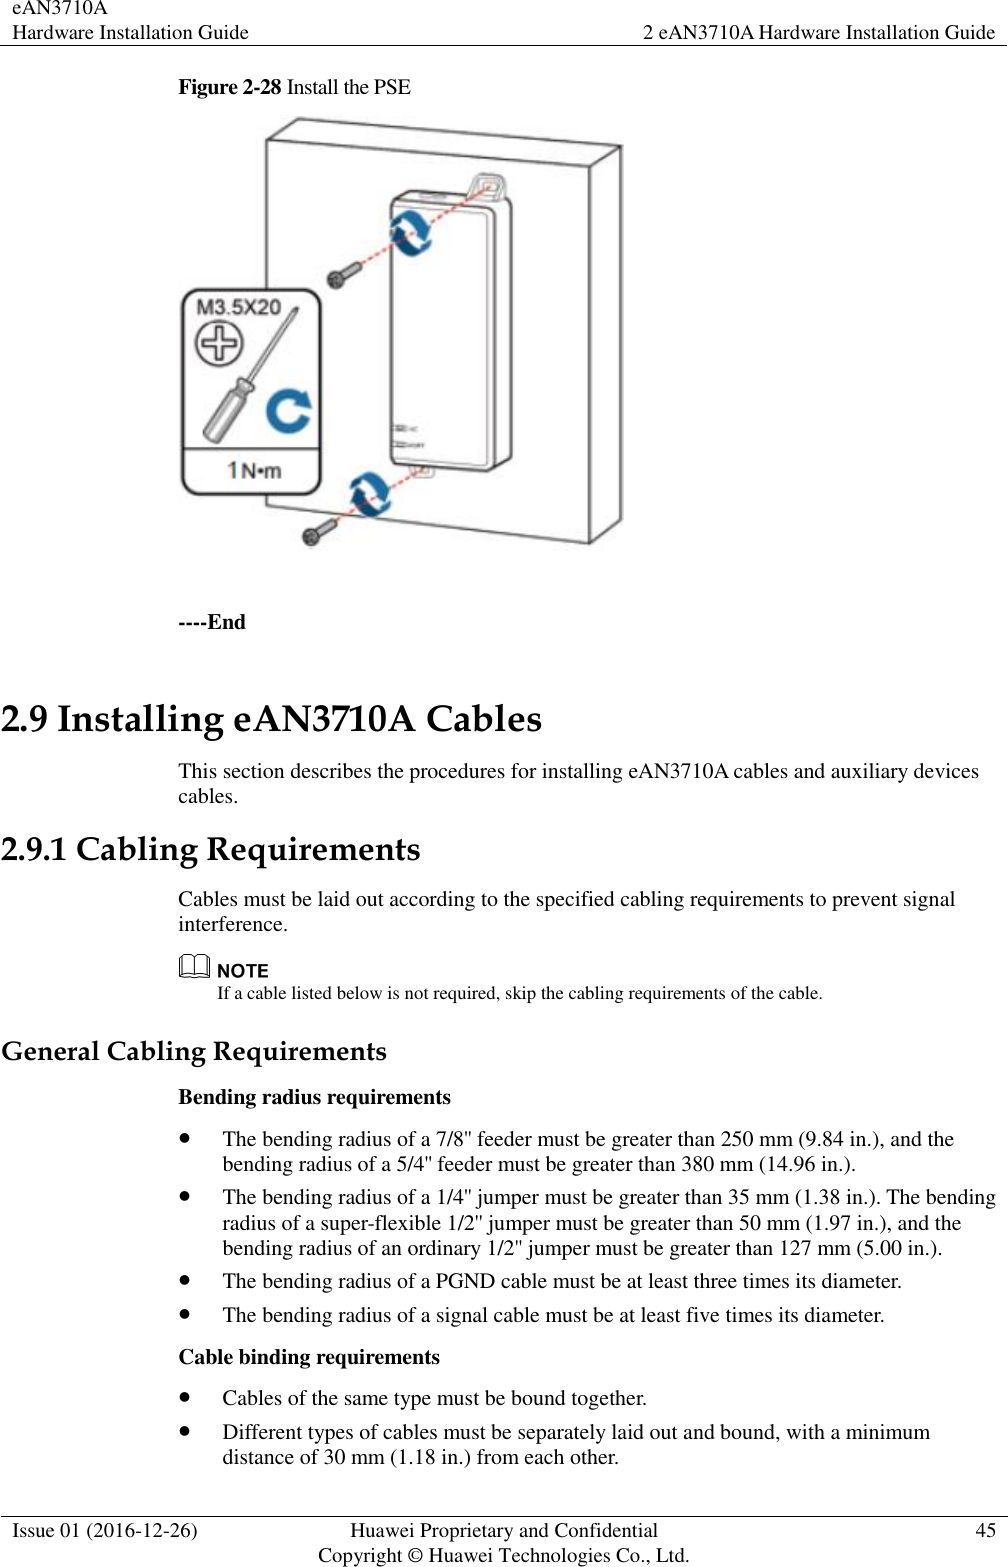 eAN3710A Hardware Installation Guide 2 eAN3710A Hardware Installation Guide  Issue 01 (2016-12-26) Huawei Proprietary and Confidential                                     Copyright © Huawei Technologies Co., Ltd. 45  Figure 2-28 Install the PSE   ----End 2.9 Installing eAN3710A Cables This section describes the procedures for installing eAN3710A cables and auxiliary devices cables. 2.9.1 Cabling Requirements Cables must be laid out according to the specified cabling requirements to prevent signal interference.  If a cable listed below is not required, skip the cabling requirements of the cable. General Cabling Requirements Bending radius requirements  The bending radius of a 7/8&apos;&apos; feeder must be greater than 250 mm (9.84 in.), and the bending radius of a 5/4&apos;&apos; feeder must be greater than 380 mm (14.96 in.).  The bending radius of a 1/4&apos;&apos; jumper must be greater than 35 mm (1.38 in.). The bending radius of a super-flexible 1/2&apos;&apos; jumper must be greater than 50 mm (1.97 in.), and the bending radius of an ordinary 1/2&apos;&apos; jumper must be greater than 127 mm (5.00 in.).  The bending radius of a PGND cable must be at least three times its diameter.  The bending radius of a signal cable must be at least five times its diameter. Cable binding requirements  Cables of the same type must be bound together.  Different types of cables must be separately laid out and bound, with a minimum distance of 30 mm (1.18 in.) from each other. 